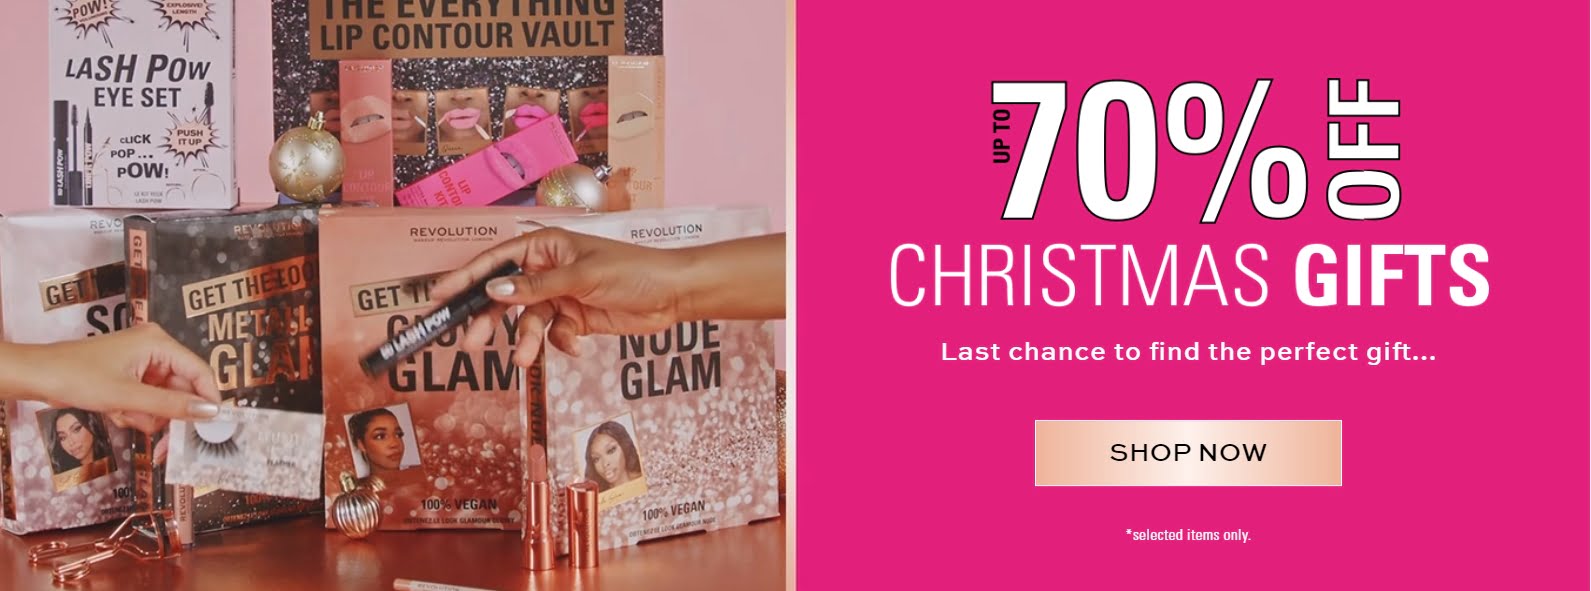 Up to 70% off Christmas Gifts at Revolution